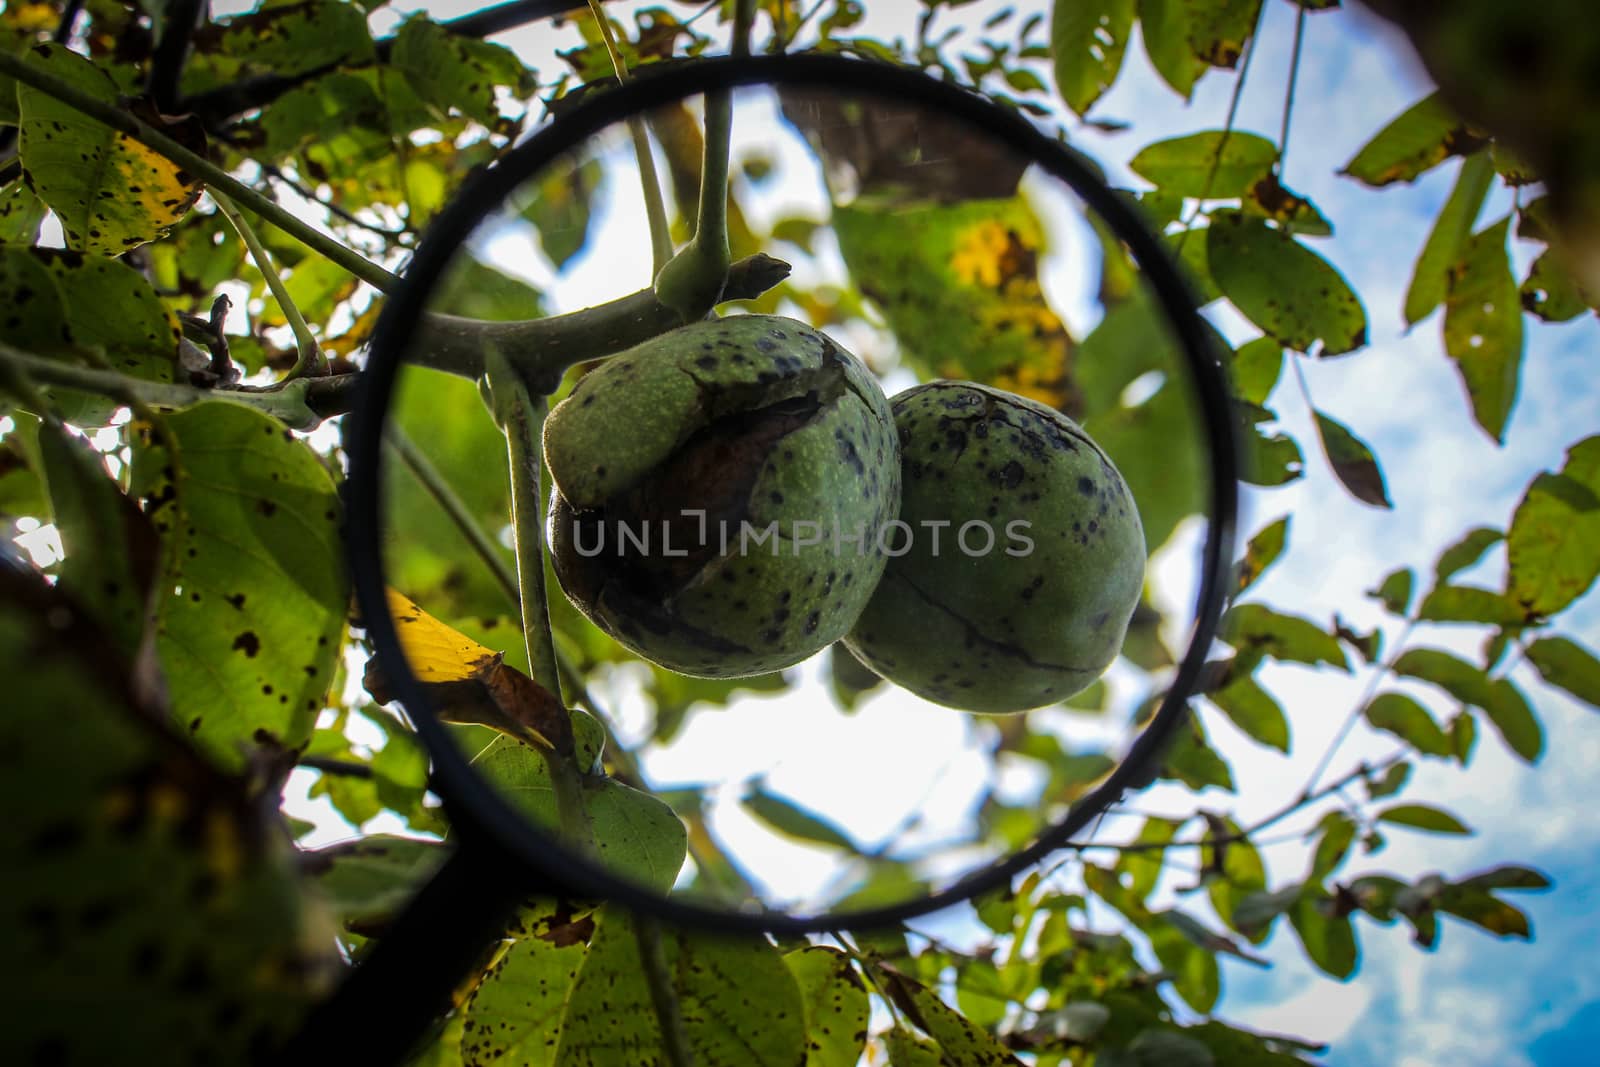 Walnut fruit enlarged with a magnifying glass. Ripe walnut inside a cracked green shell on a branch with the sky in the background. Zavidovici, Bosnia and Herzegovina.